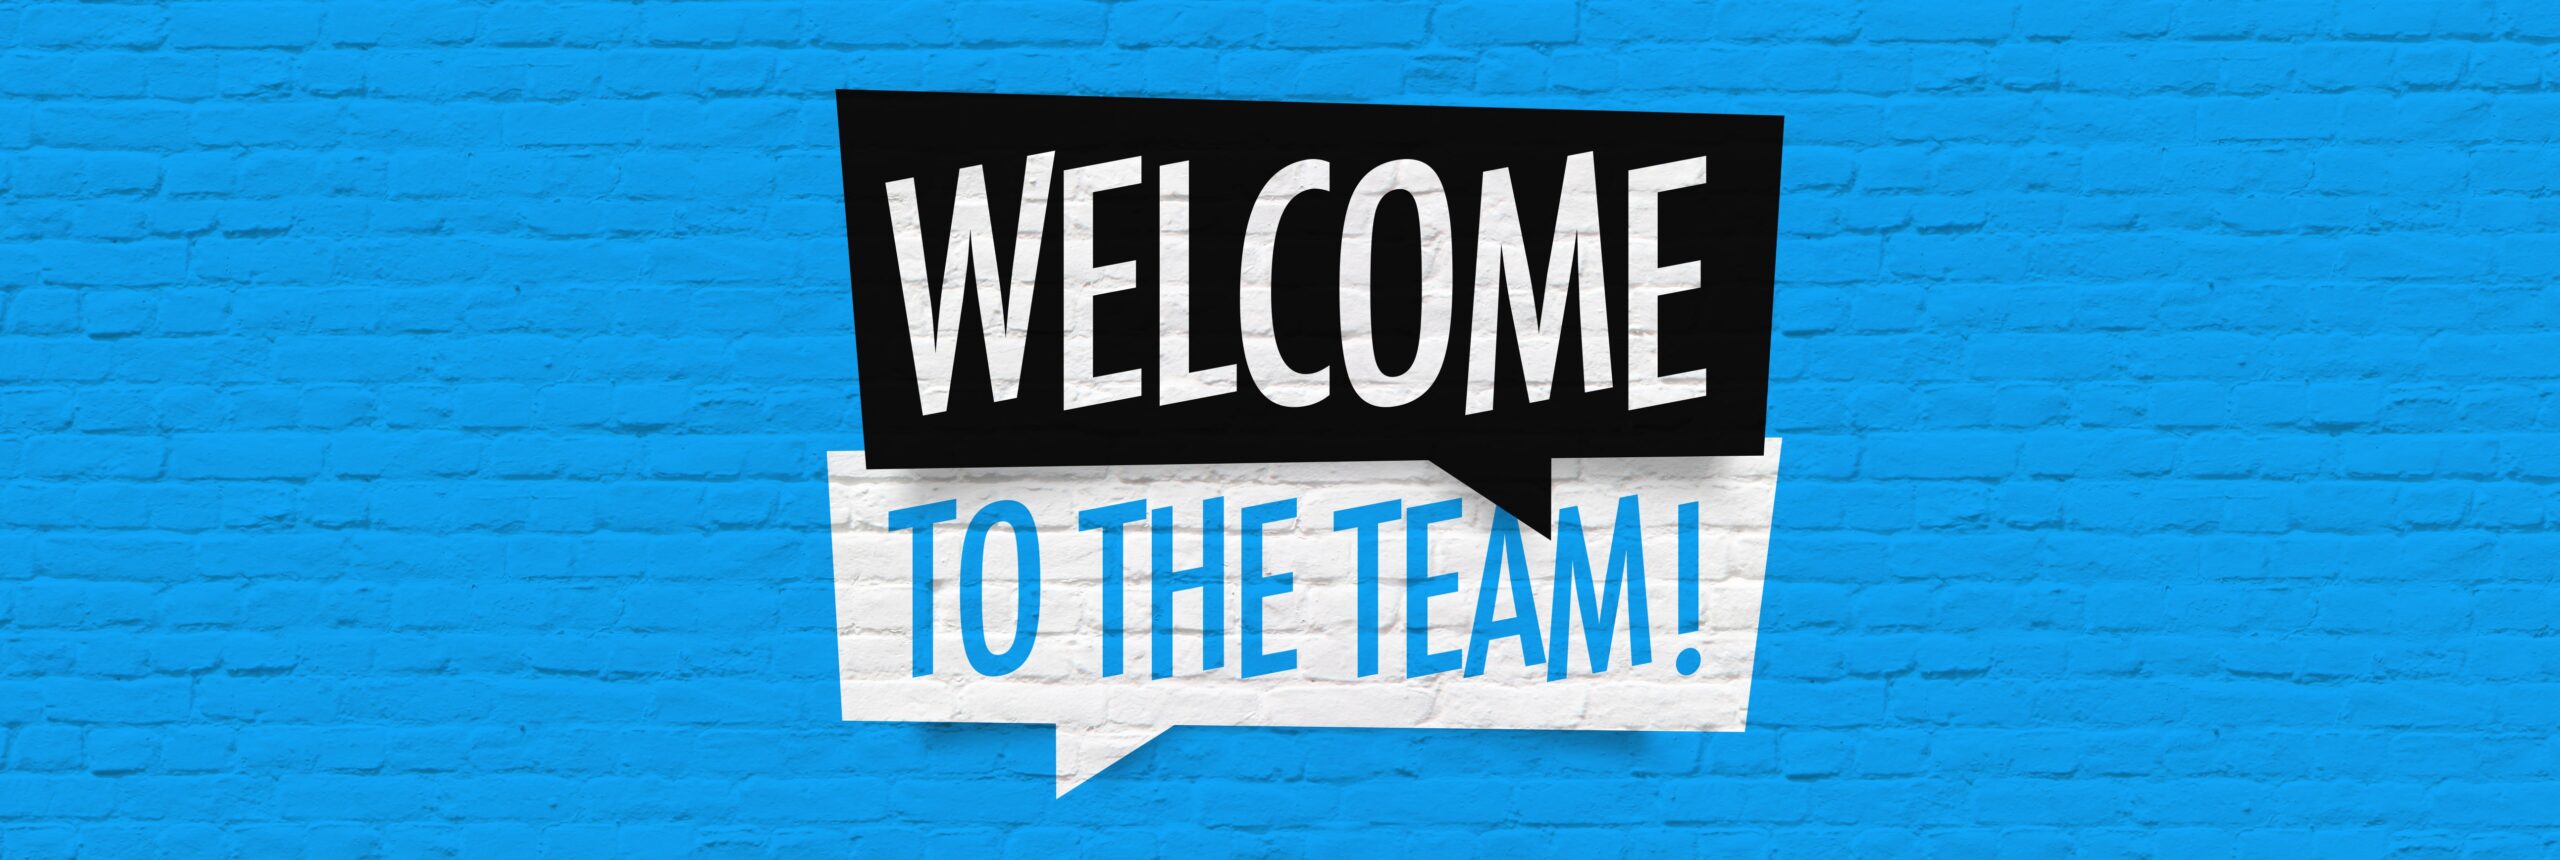 welcome to the team on blue background